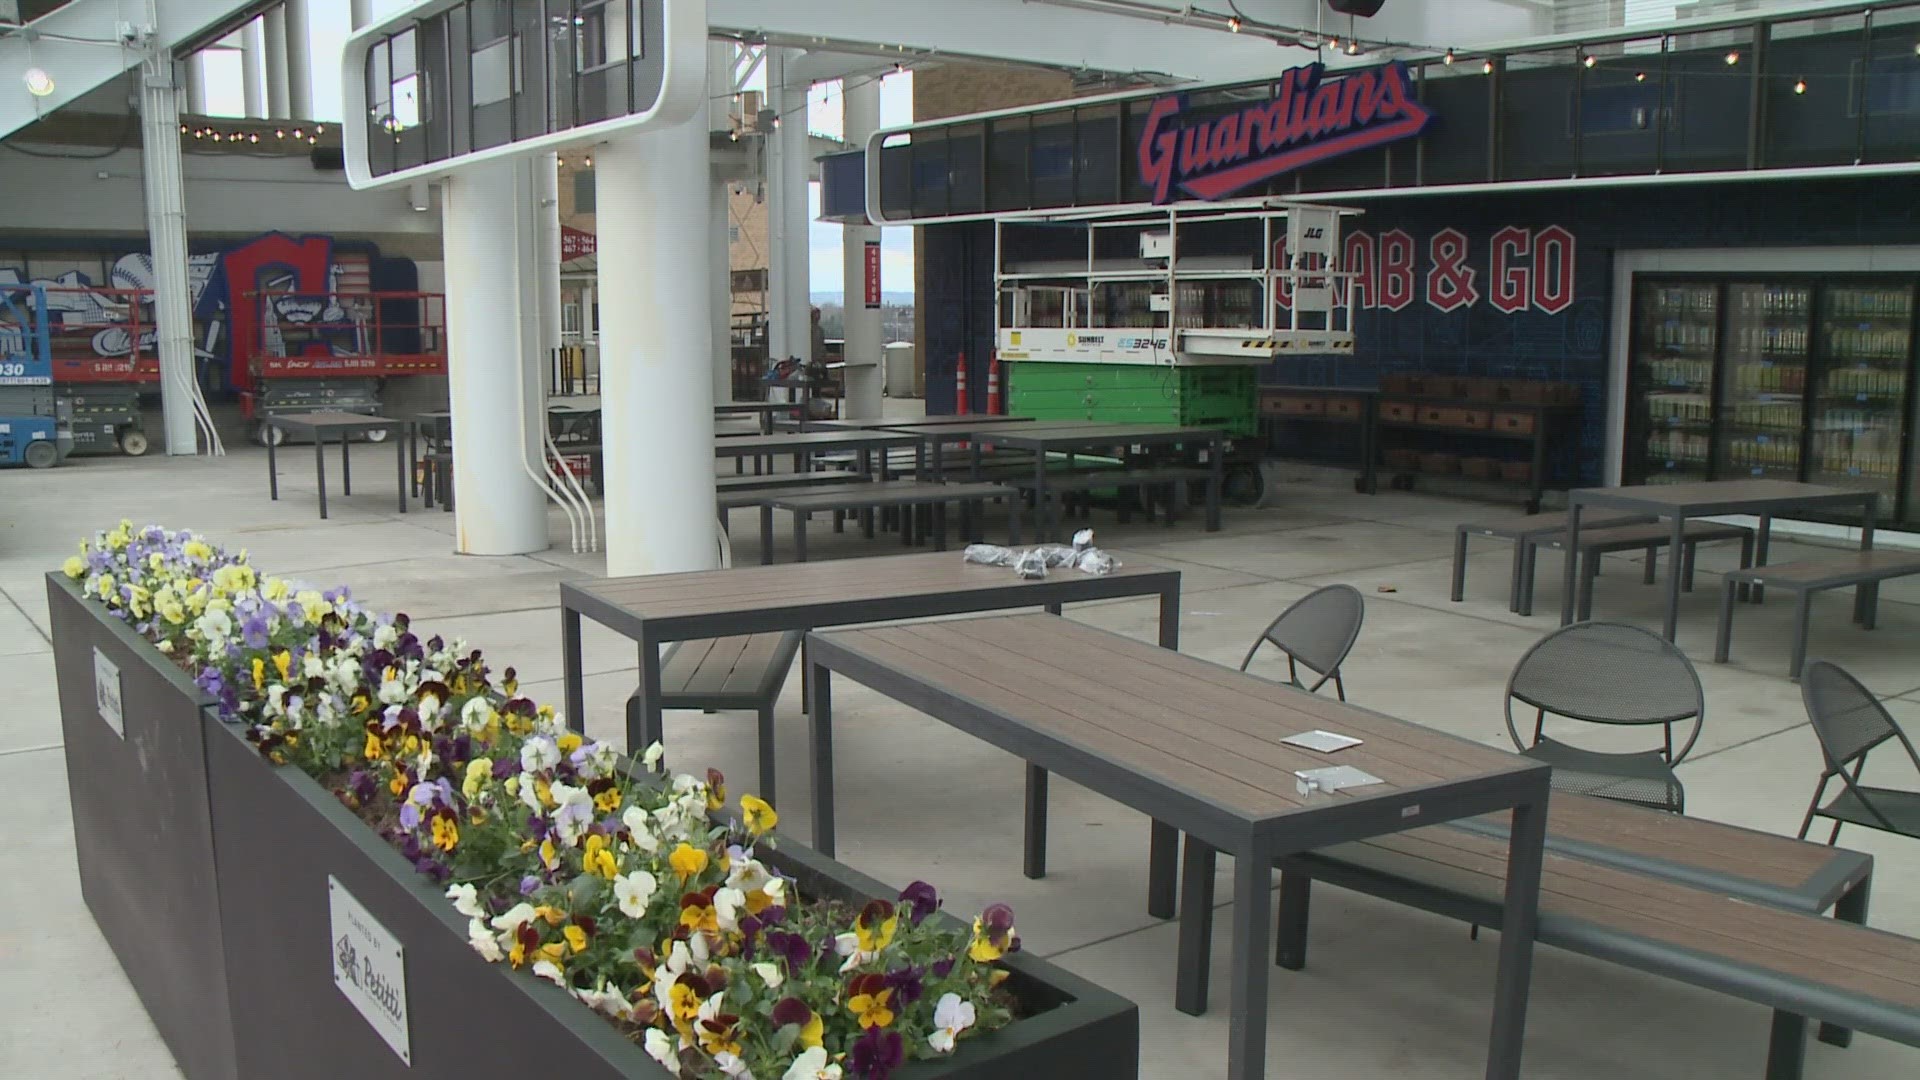 Cleveland Guardians fans will get the first chance to see new Progressive Field improvements at the home opener.